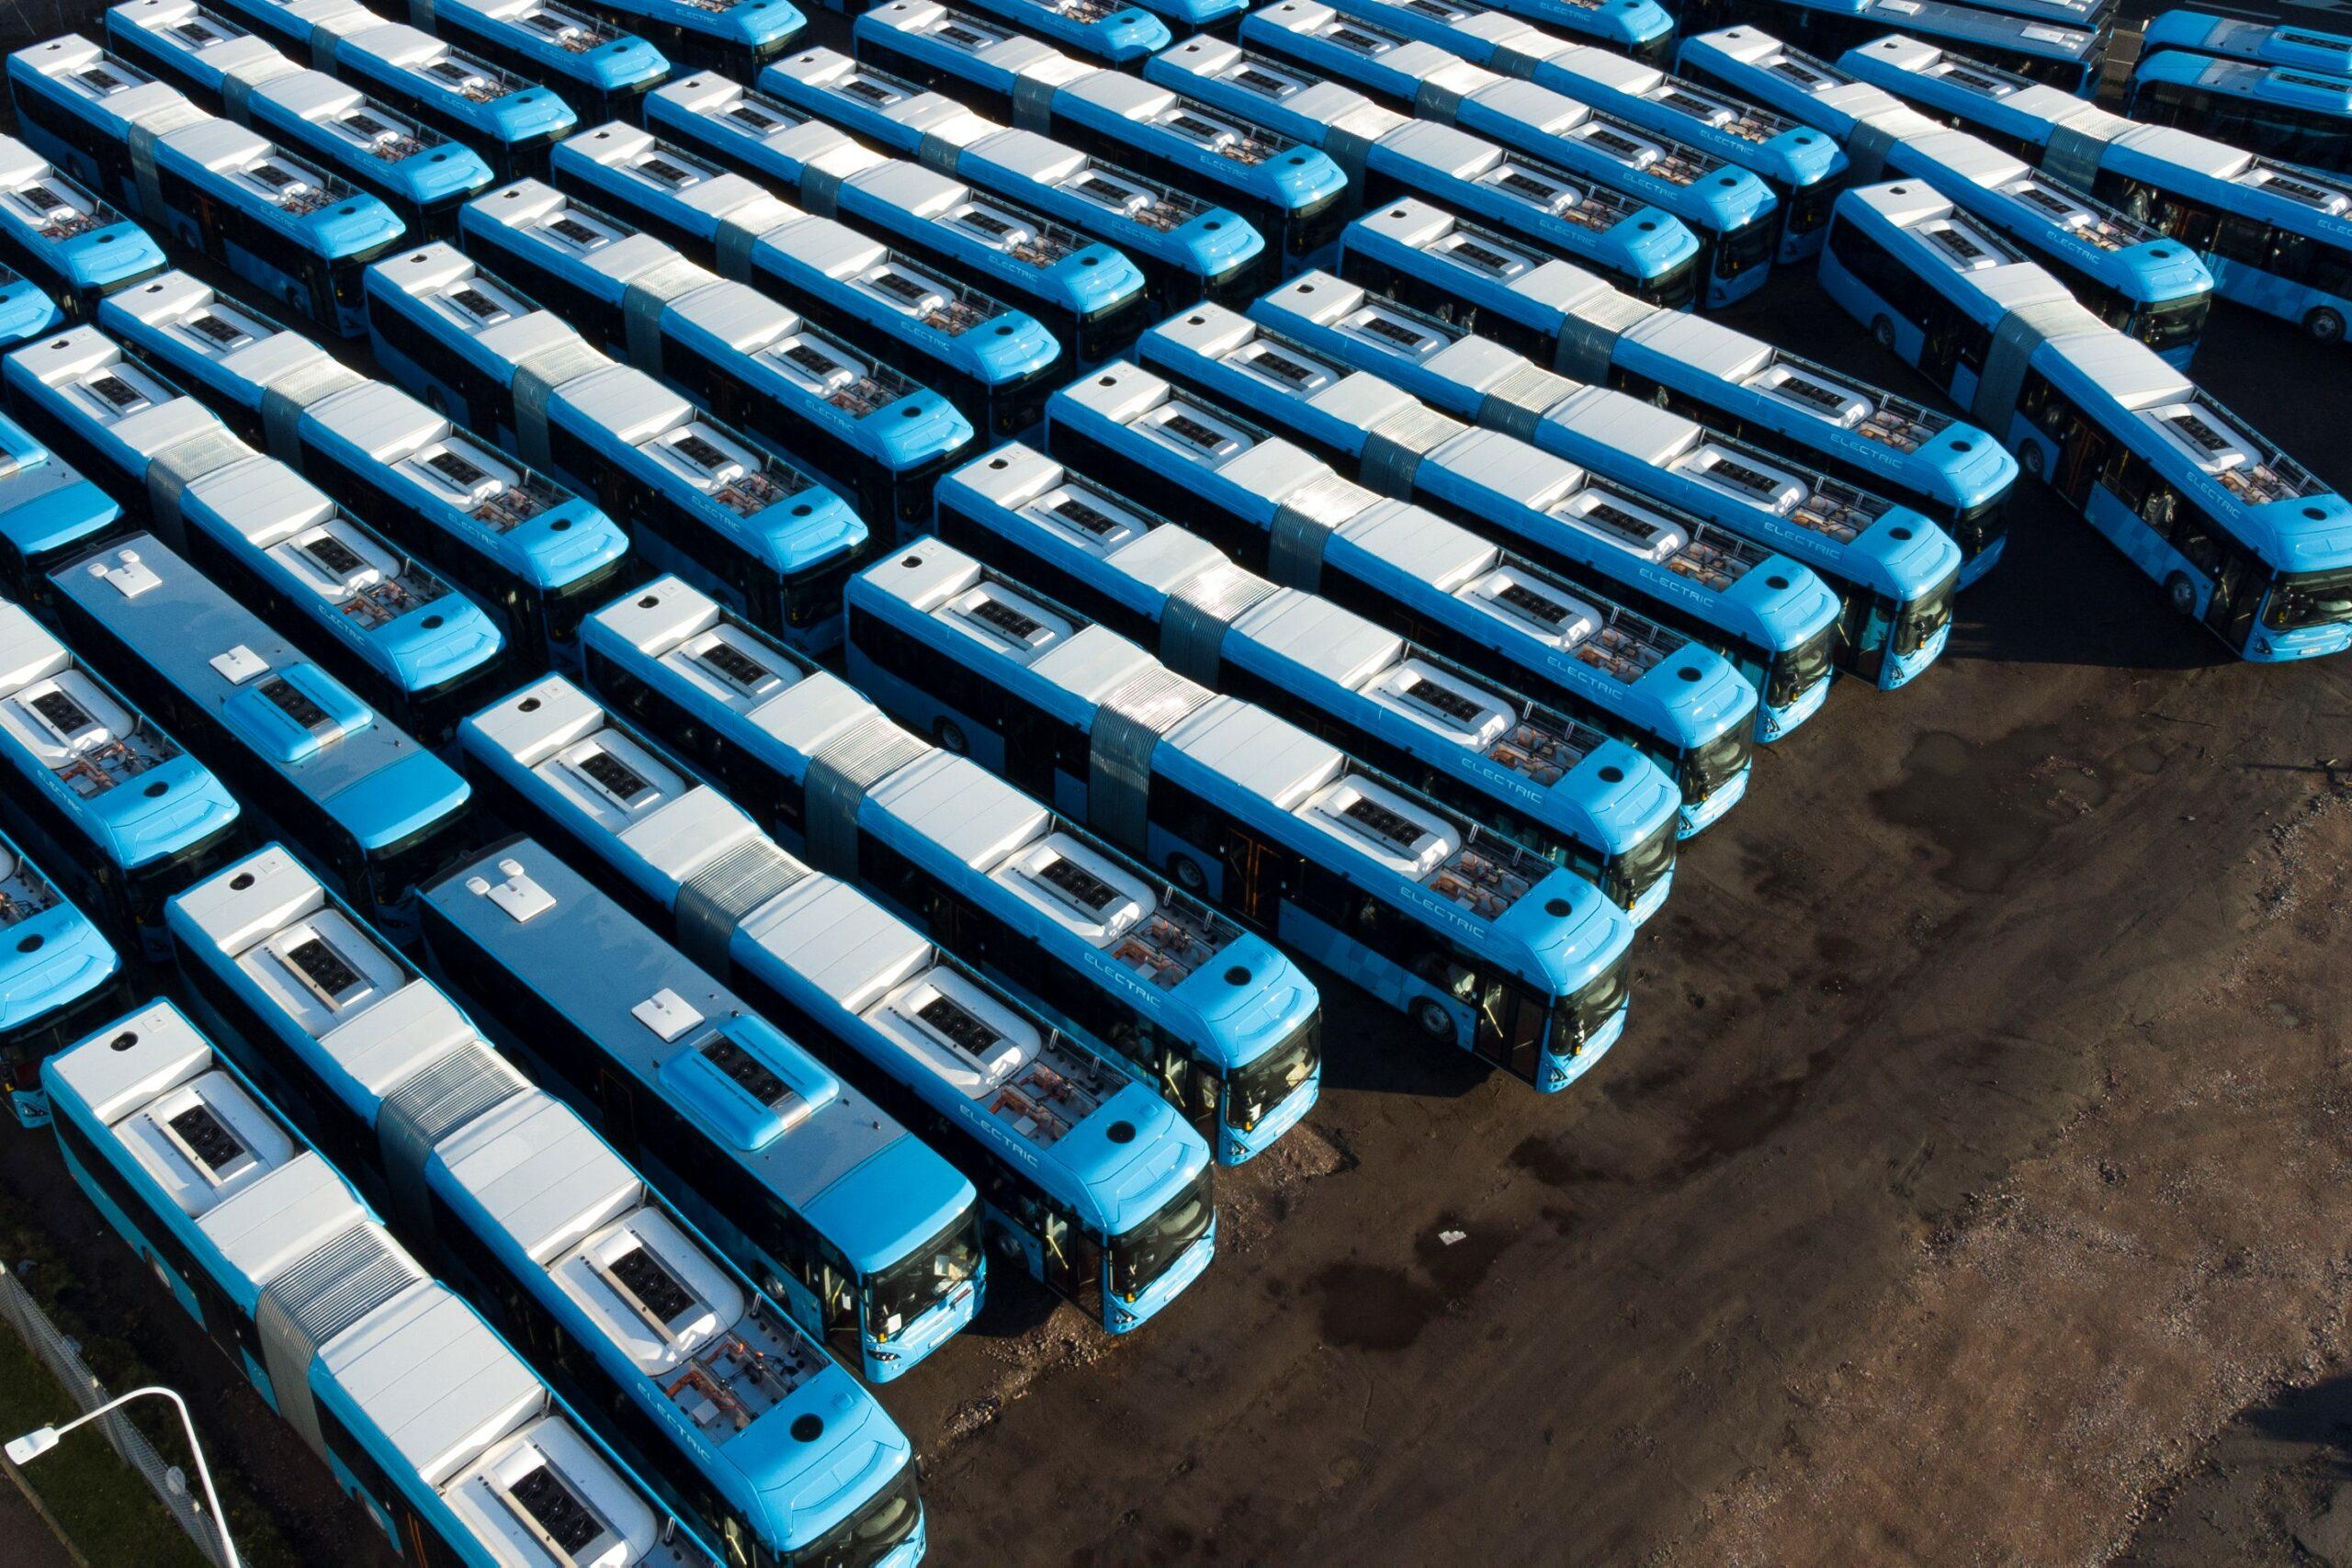 Aerial view of lots of buses parked close together.